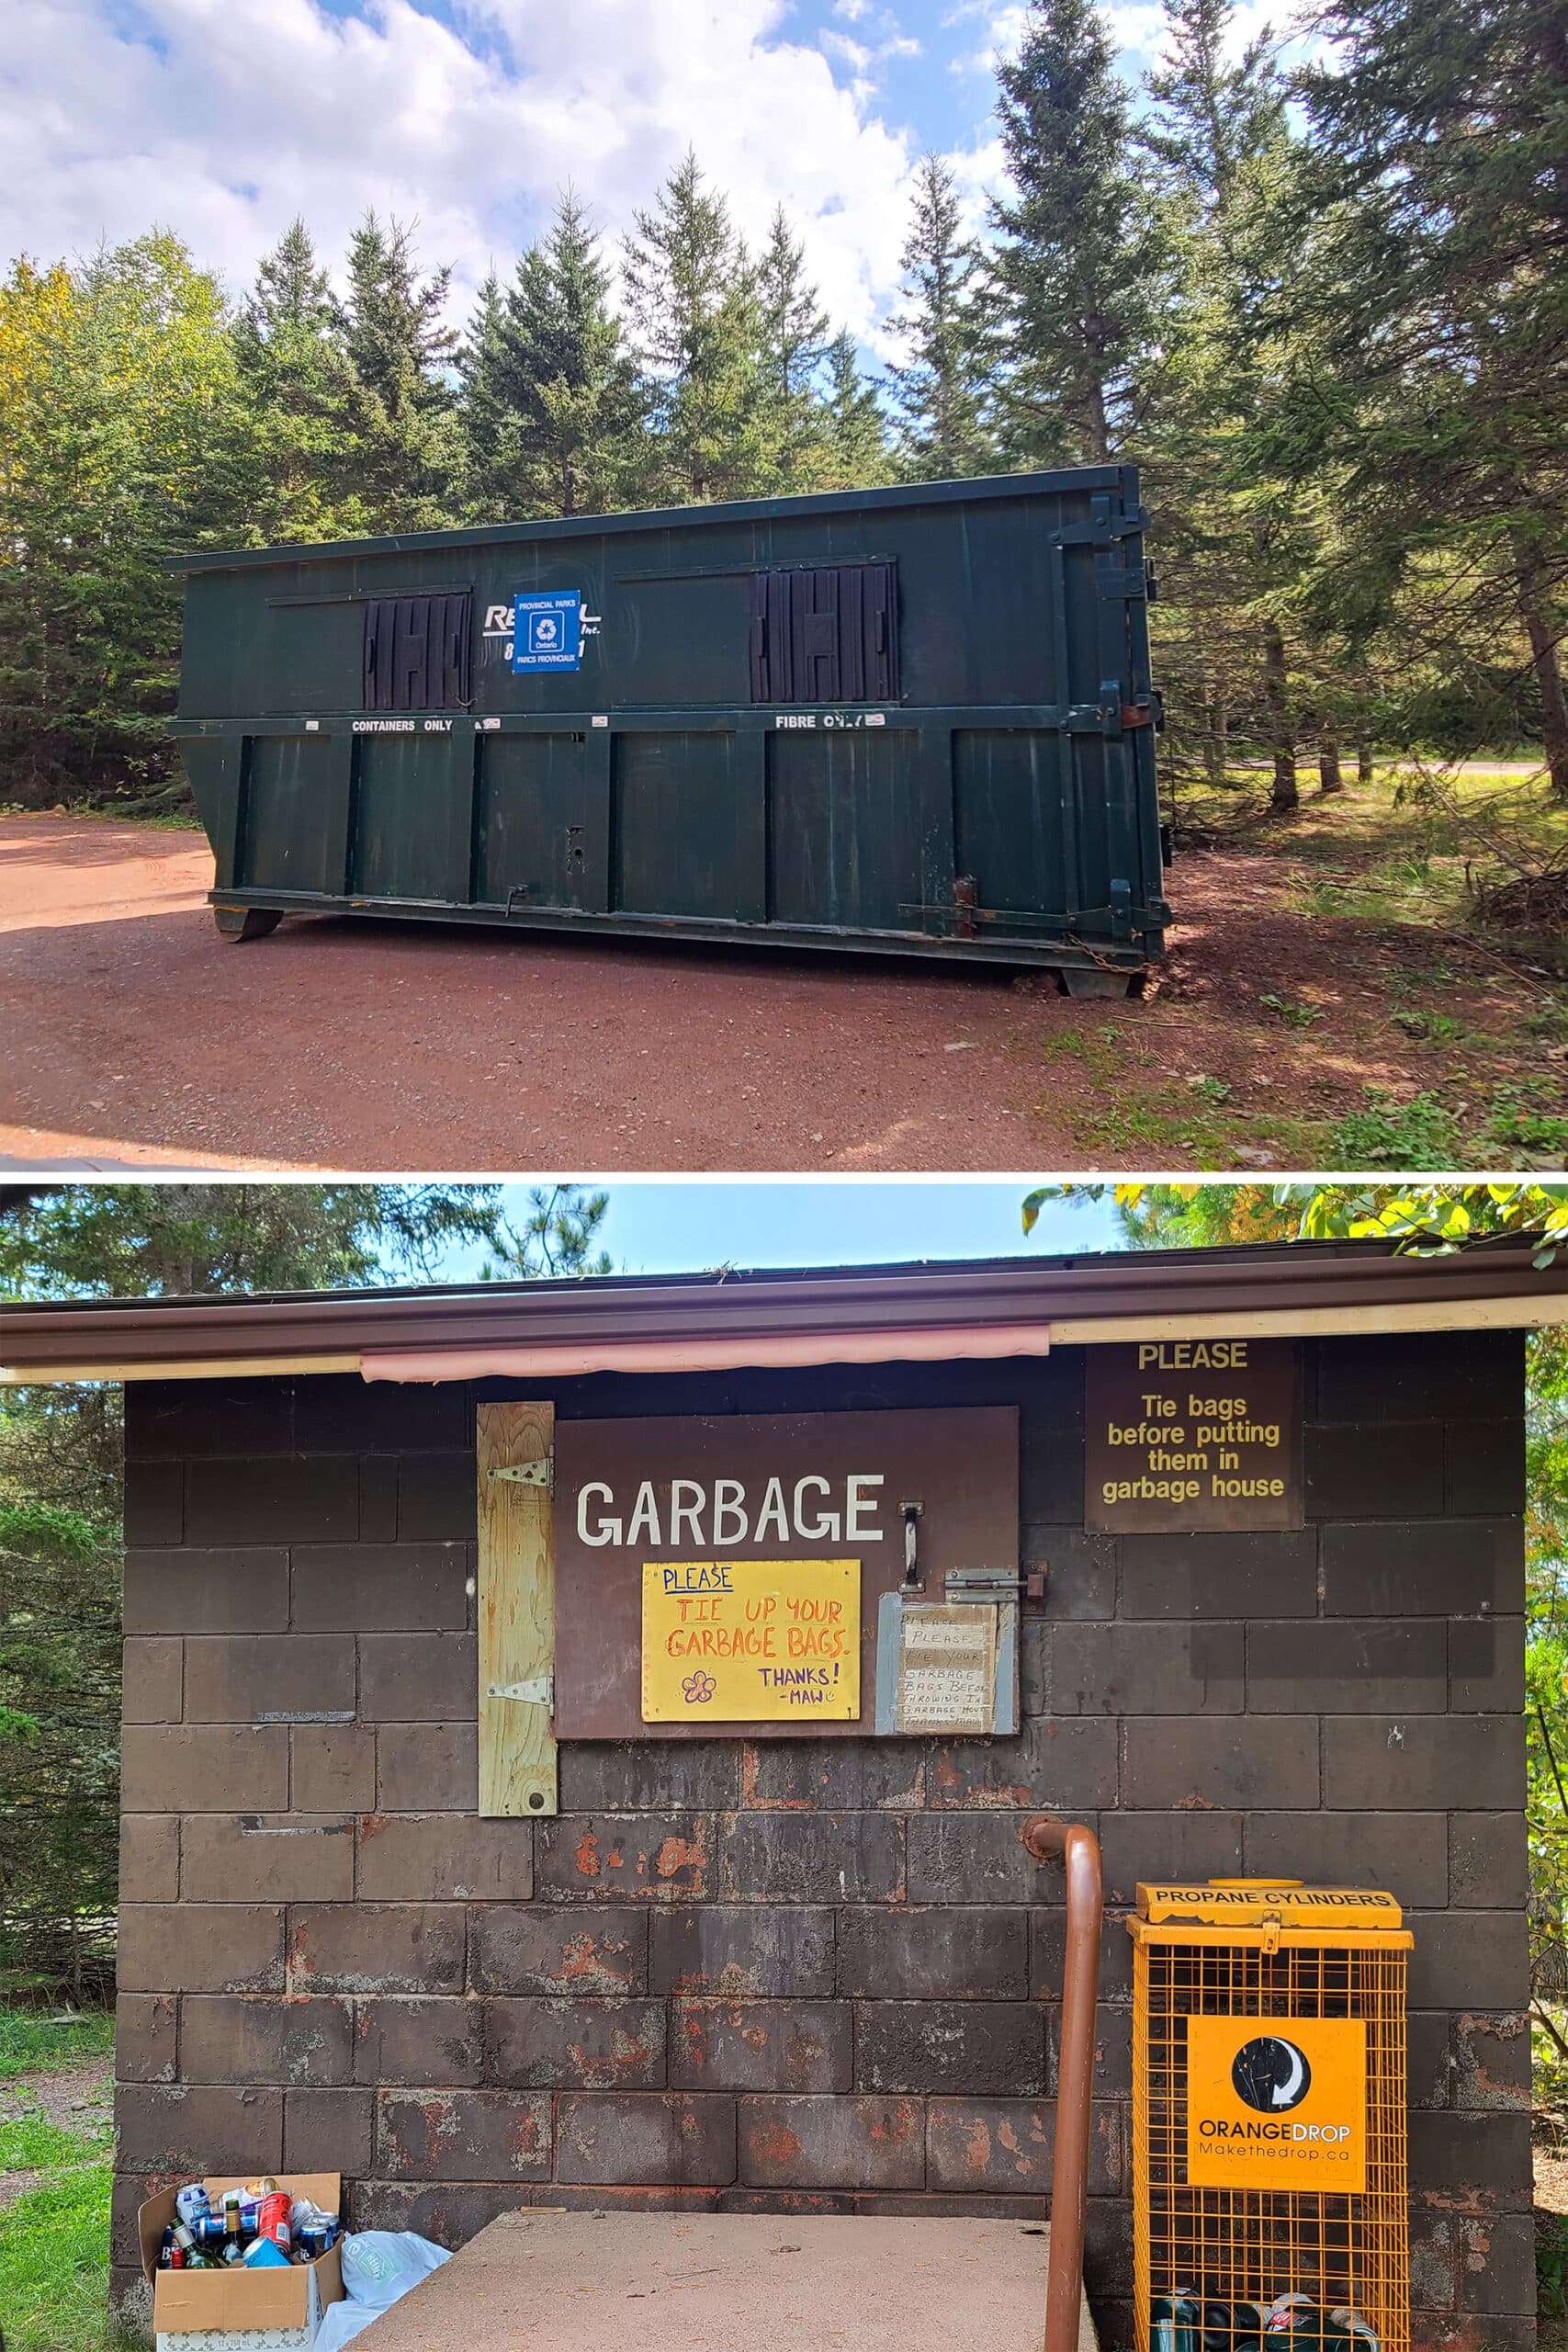 The garbage and recycling area.